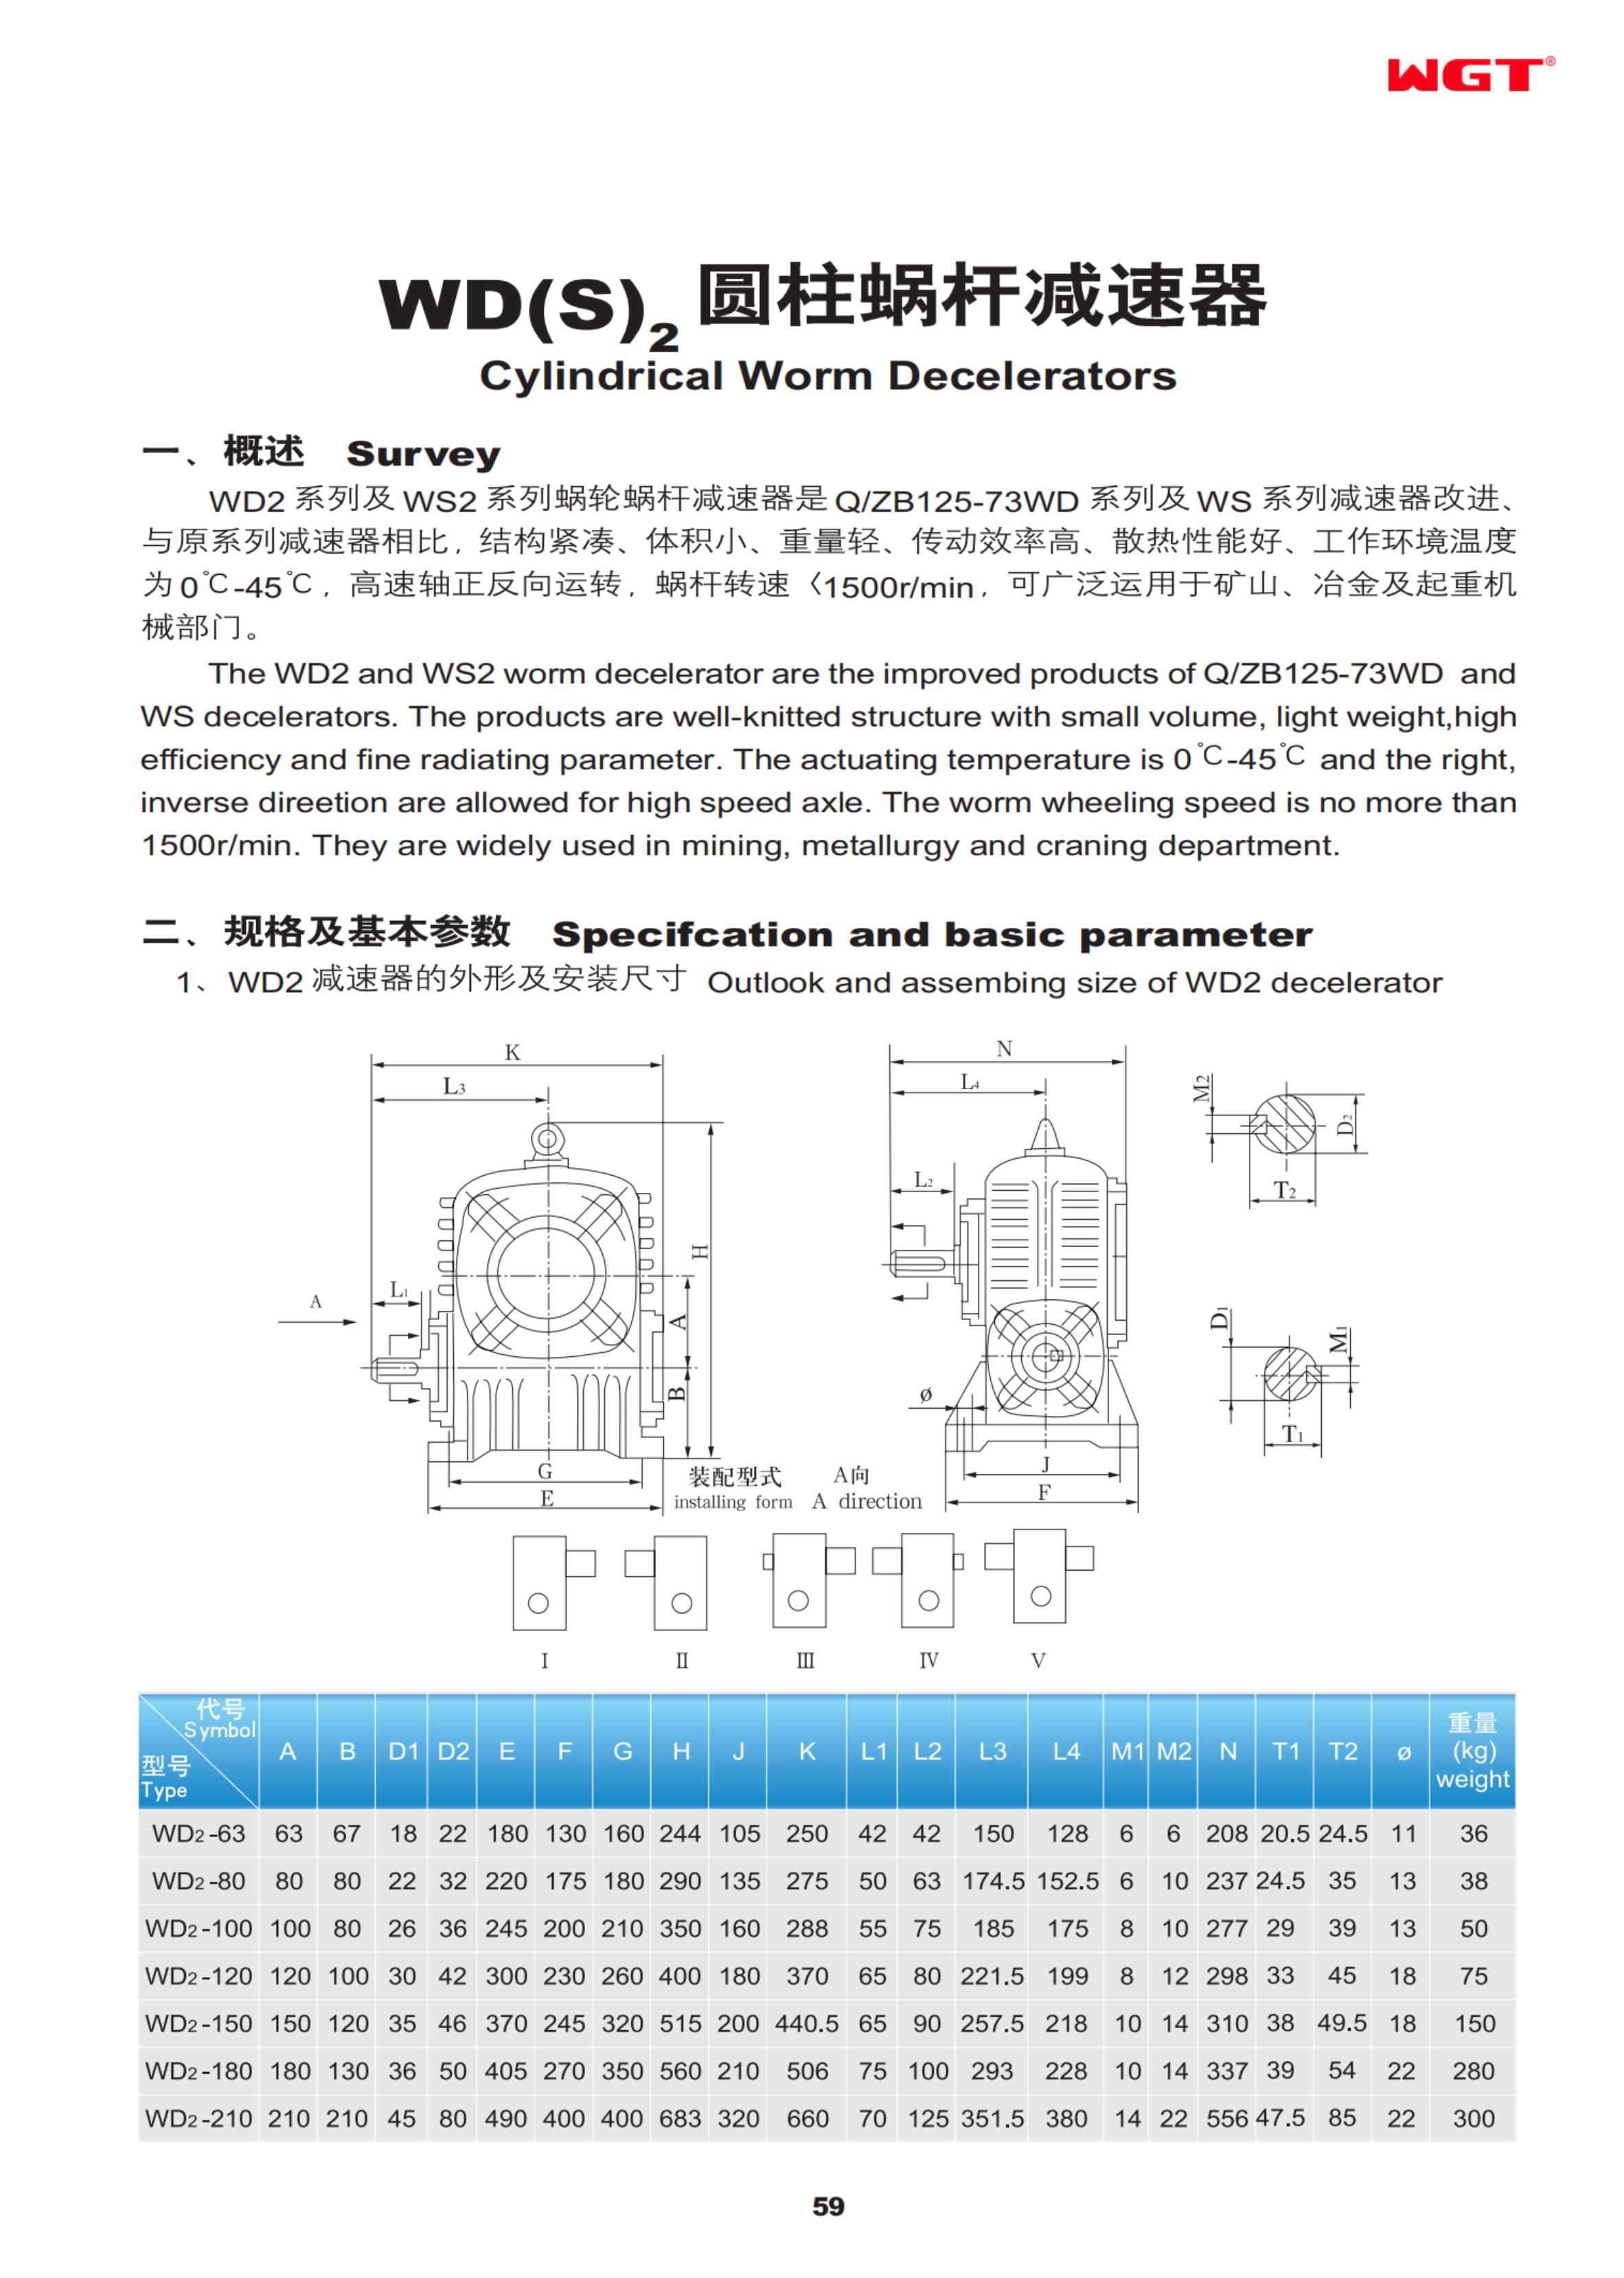 WD2-210 cylindrical worm reducer WGT